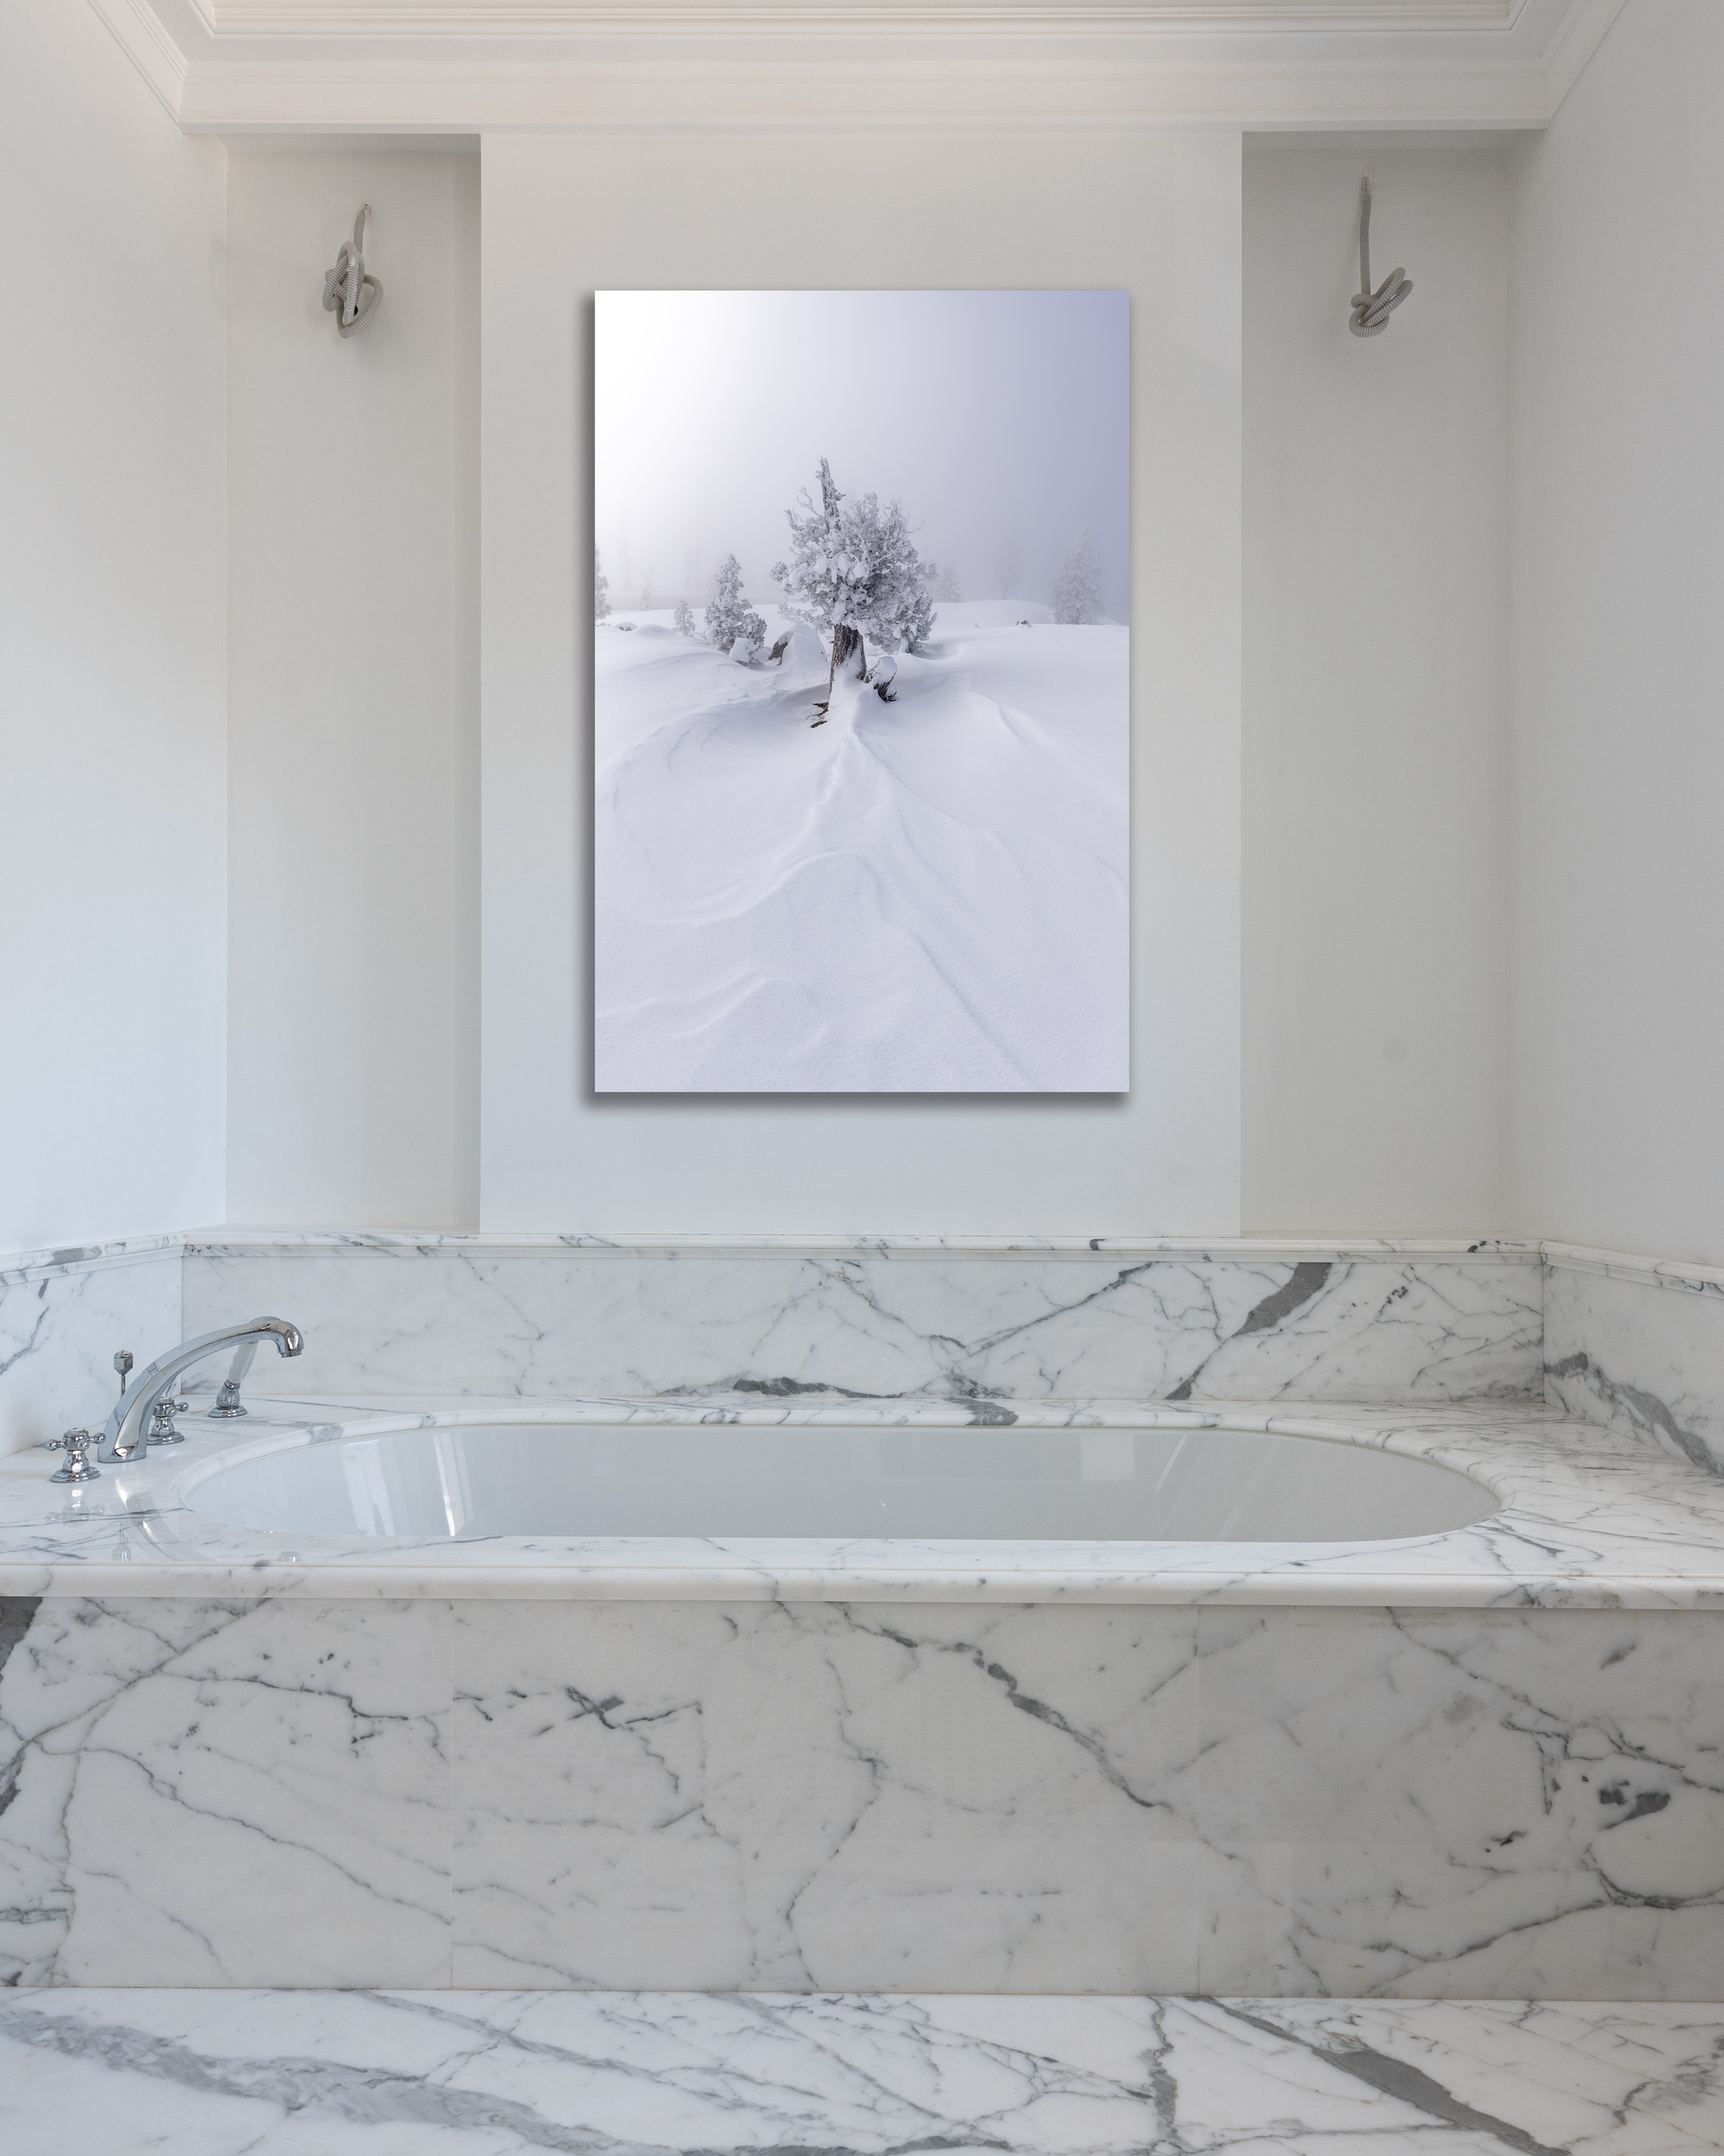 A lone juniper tree dressed in snow is highlighted in a photograph above a marbled bathtub.